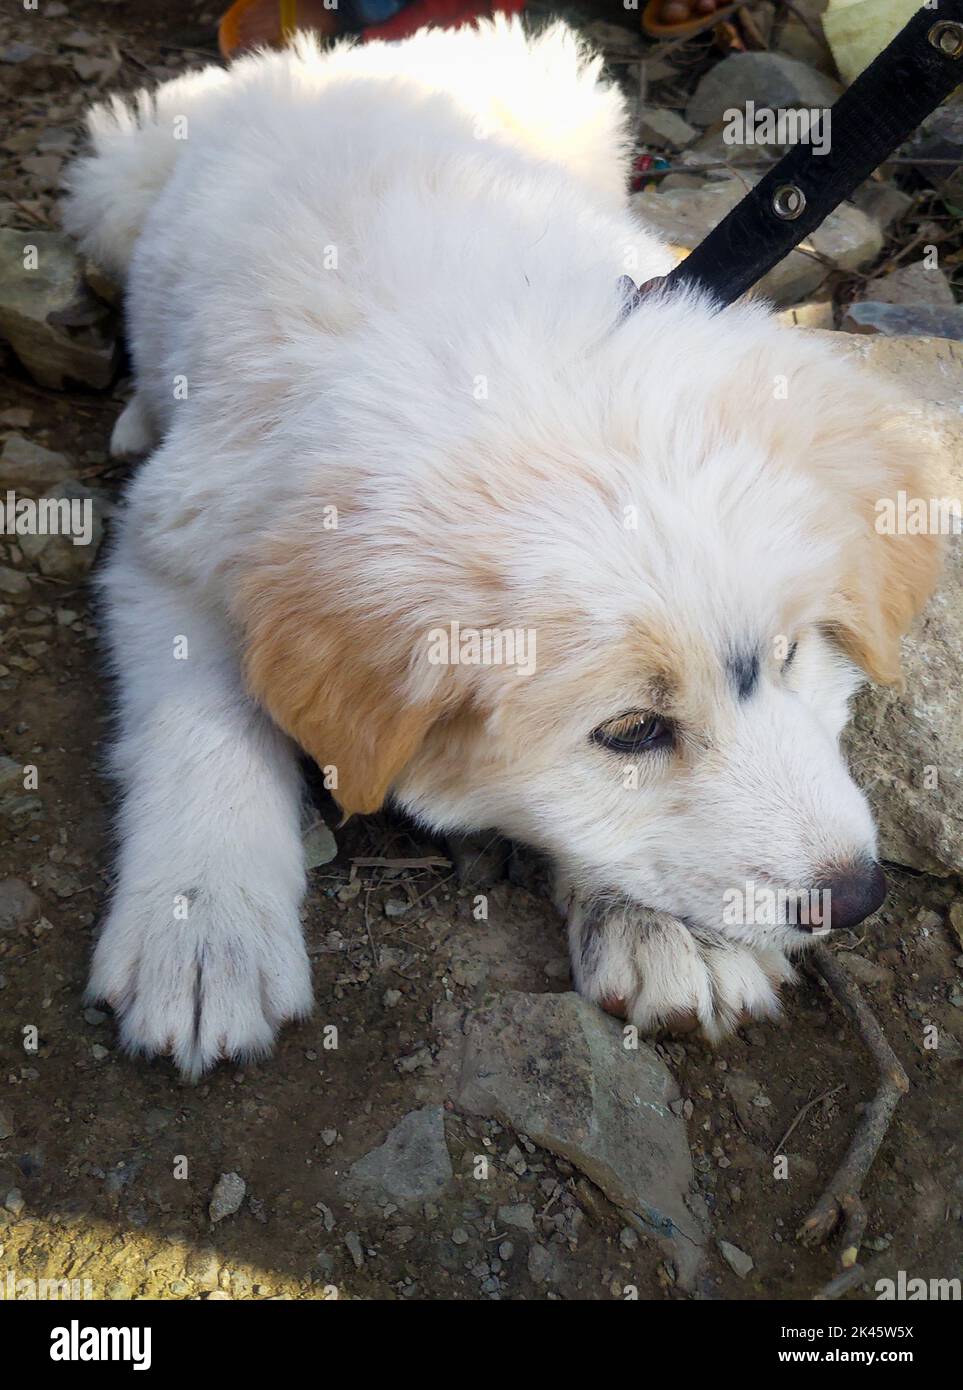 A close up shot of a cute white himalayan shepherd puppy in India sitting. Uttarakhand India. Stock Photo